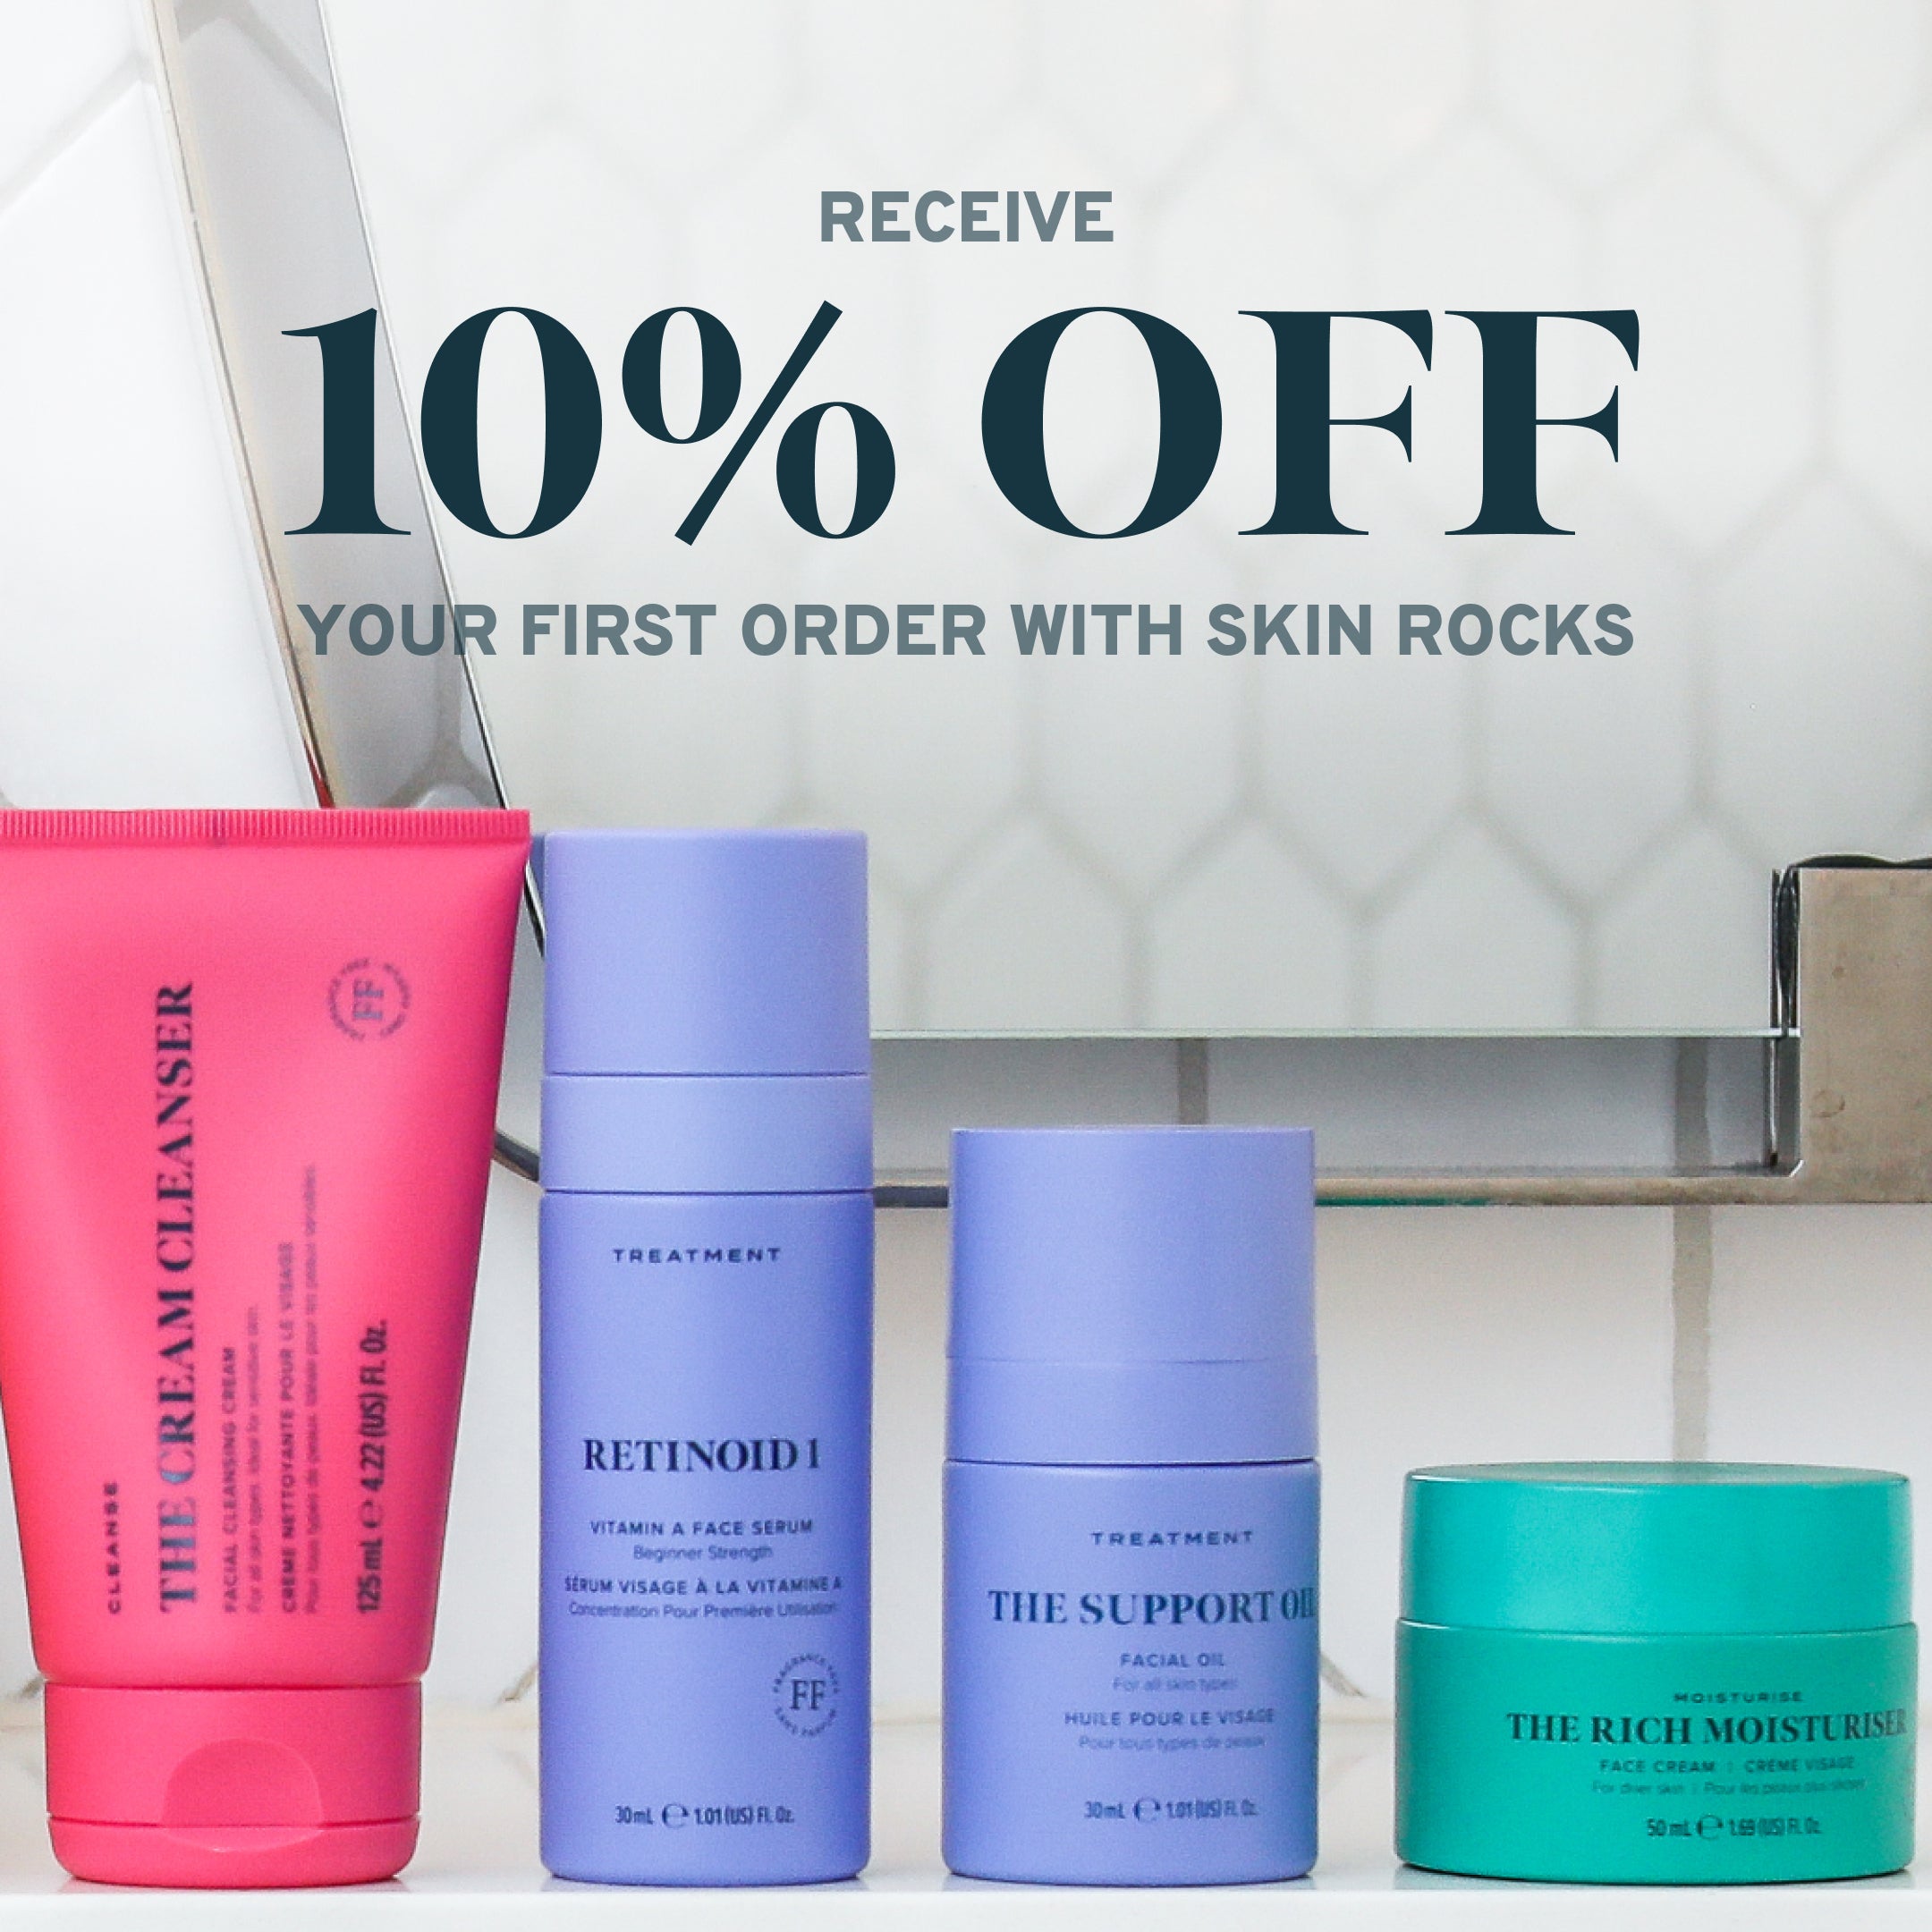 Receive 10% off your first Skin Rocks order